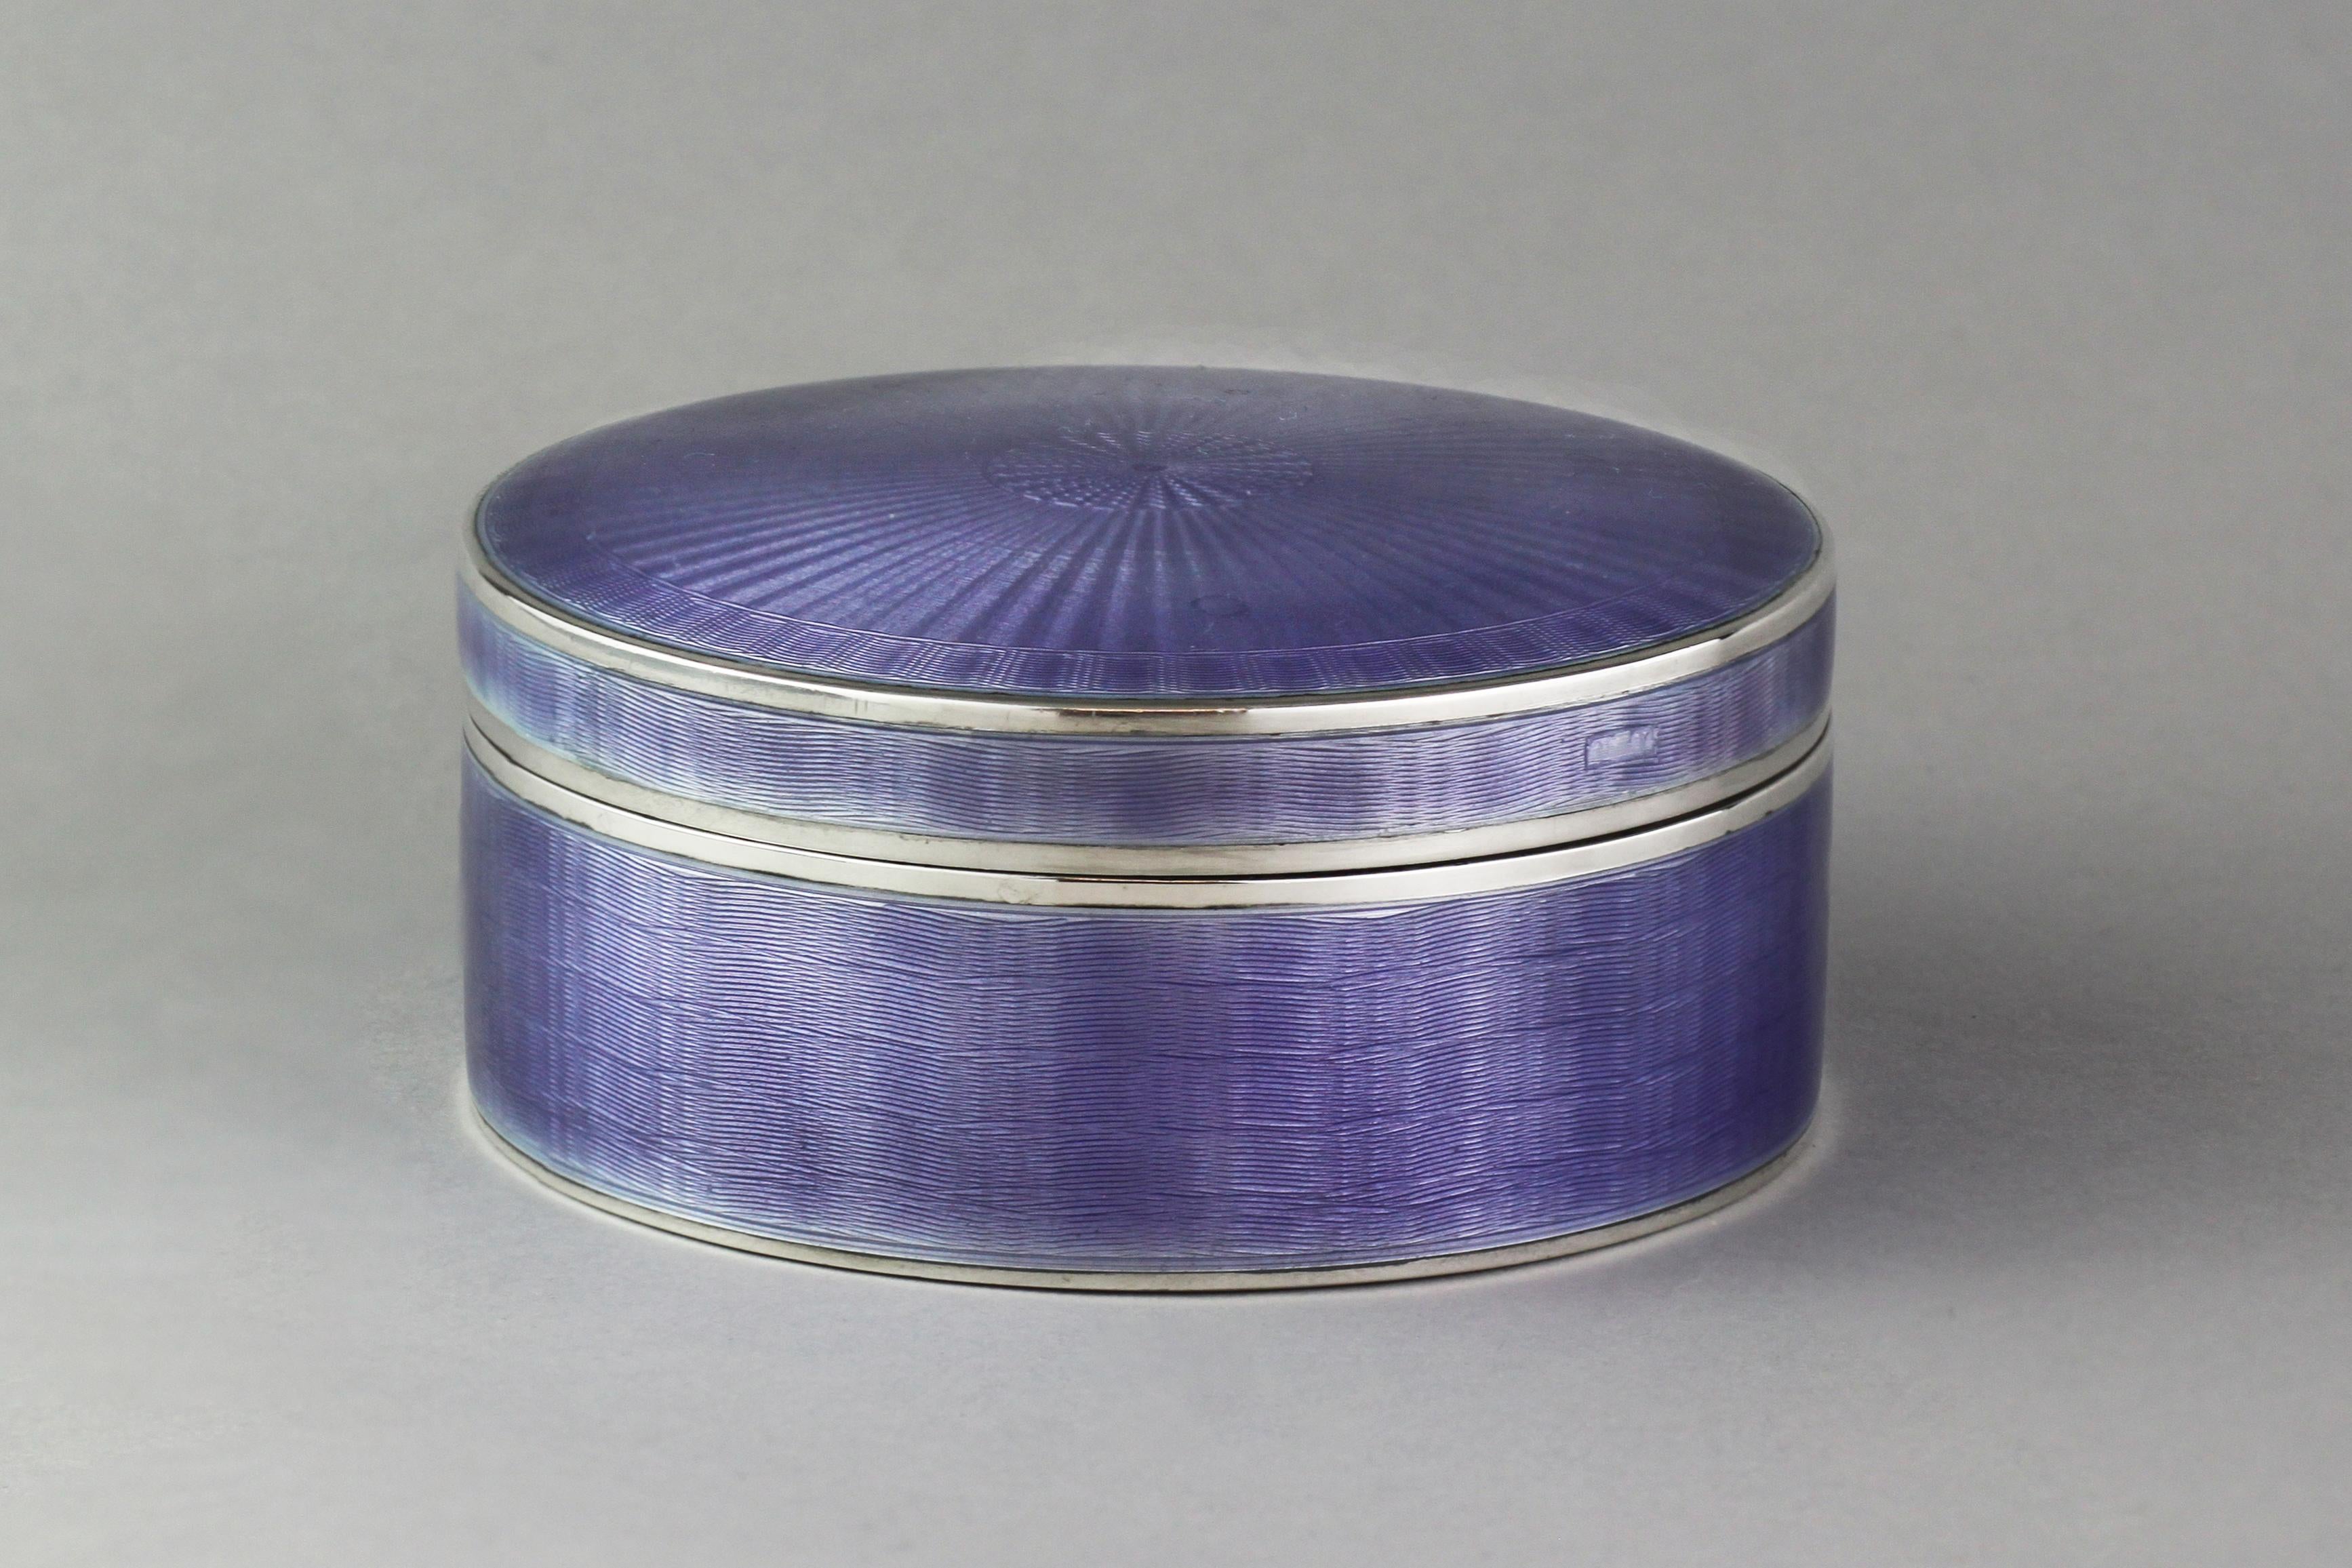 Sterling silver box with gilt interior and purple enamel.
Maker: Elkington & Co Ltd
Made in Birmingham 1945
Fully hallmarked.

Dimensions - 
Diameter 10.4 cm
Height 4.6 cm
Weight: 274 grams

Condition: Minor surface wear from general